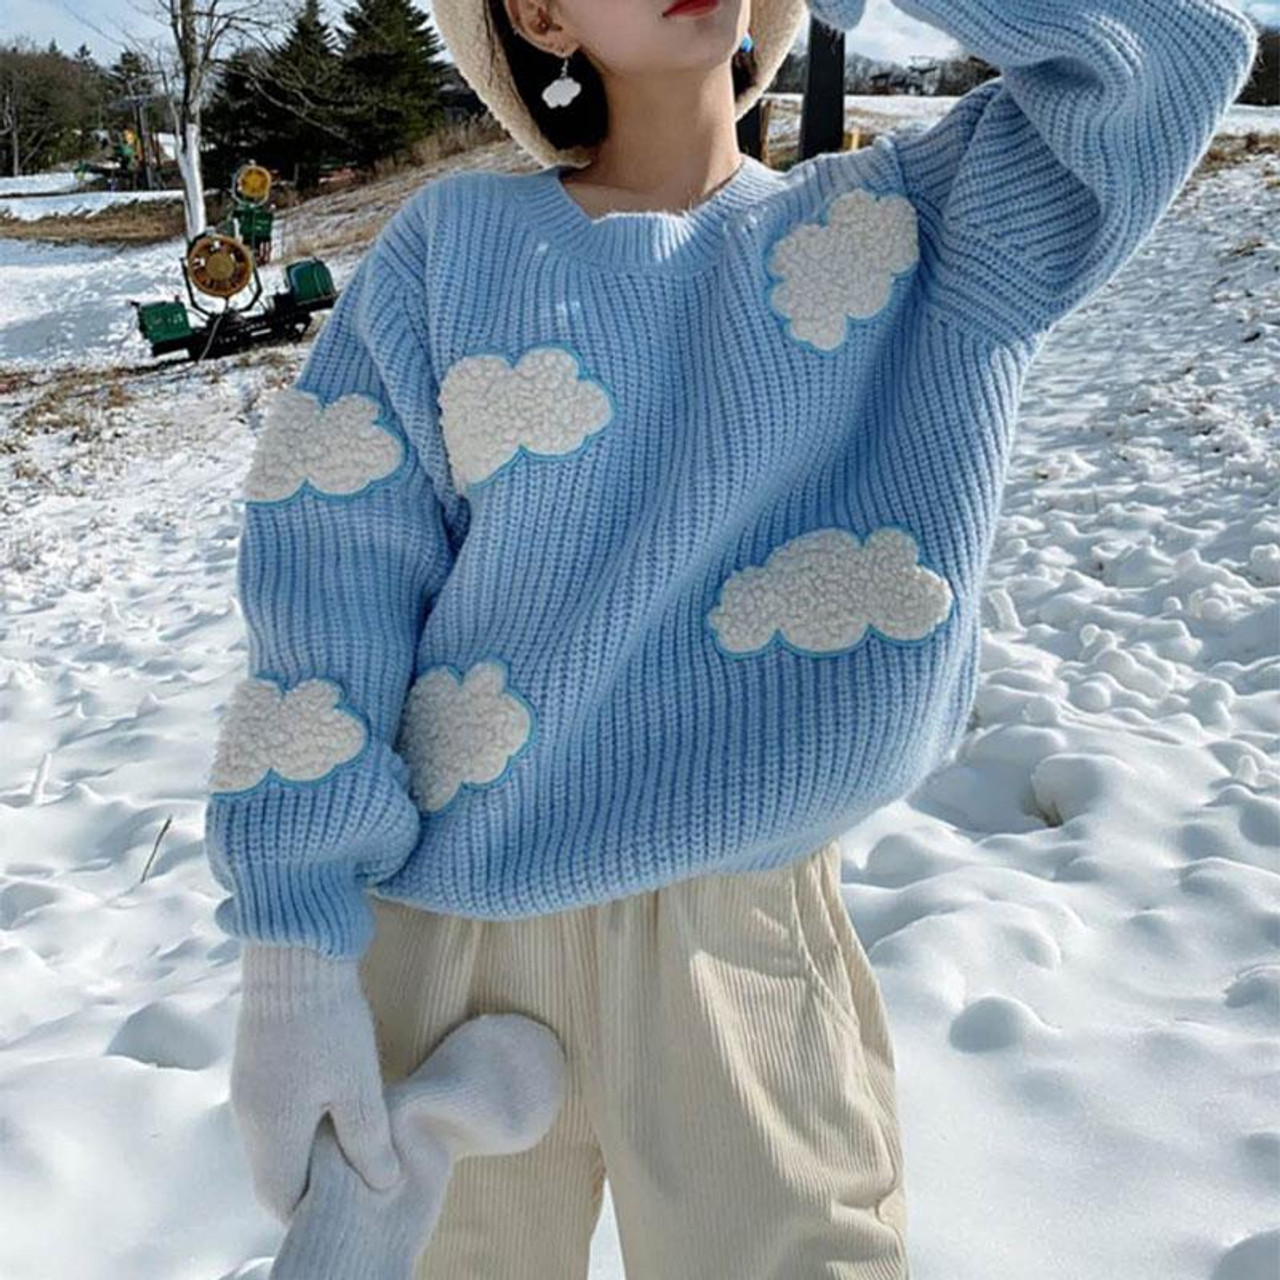 https://cdn11.bigcommerce.com/s-c7qlm8a06j/images/stencil/1280x1280/products/1859/16084/soft-girl-clouds-knitted-sweater-cosmiquestudio-aestheticoutfits__62567.1644000853.jpg?c=1?imbypass=on